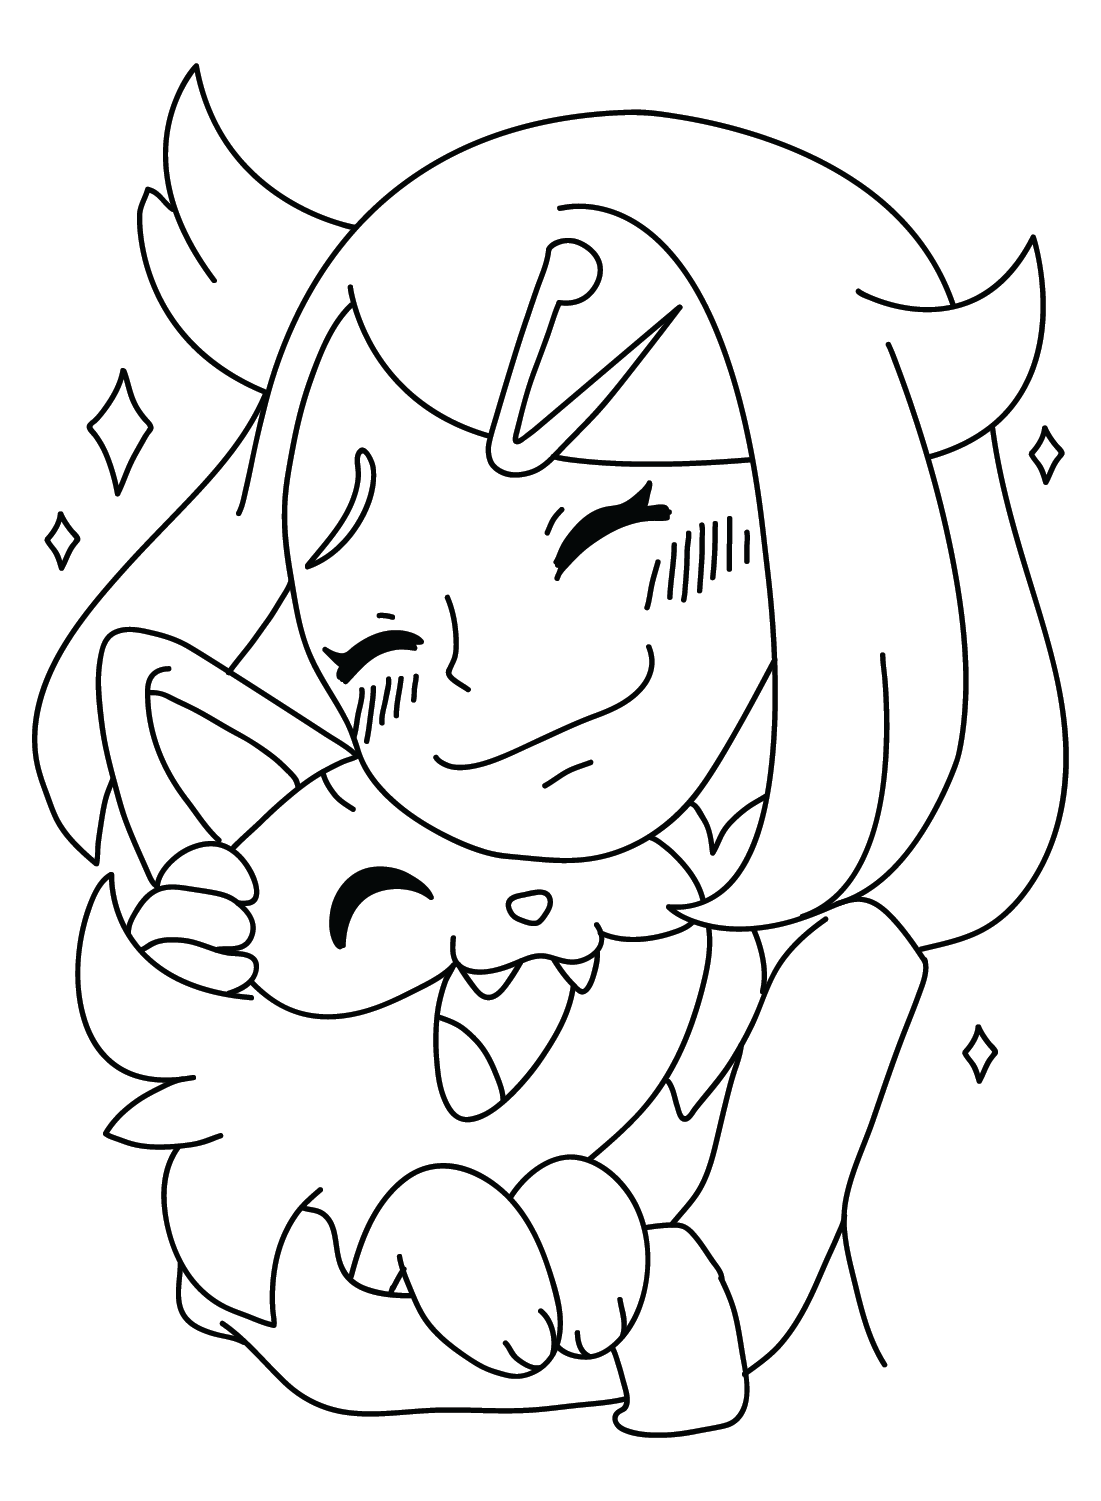 Liko pokemon coloring pages